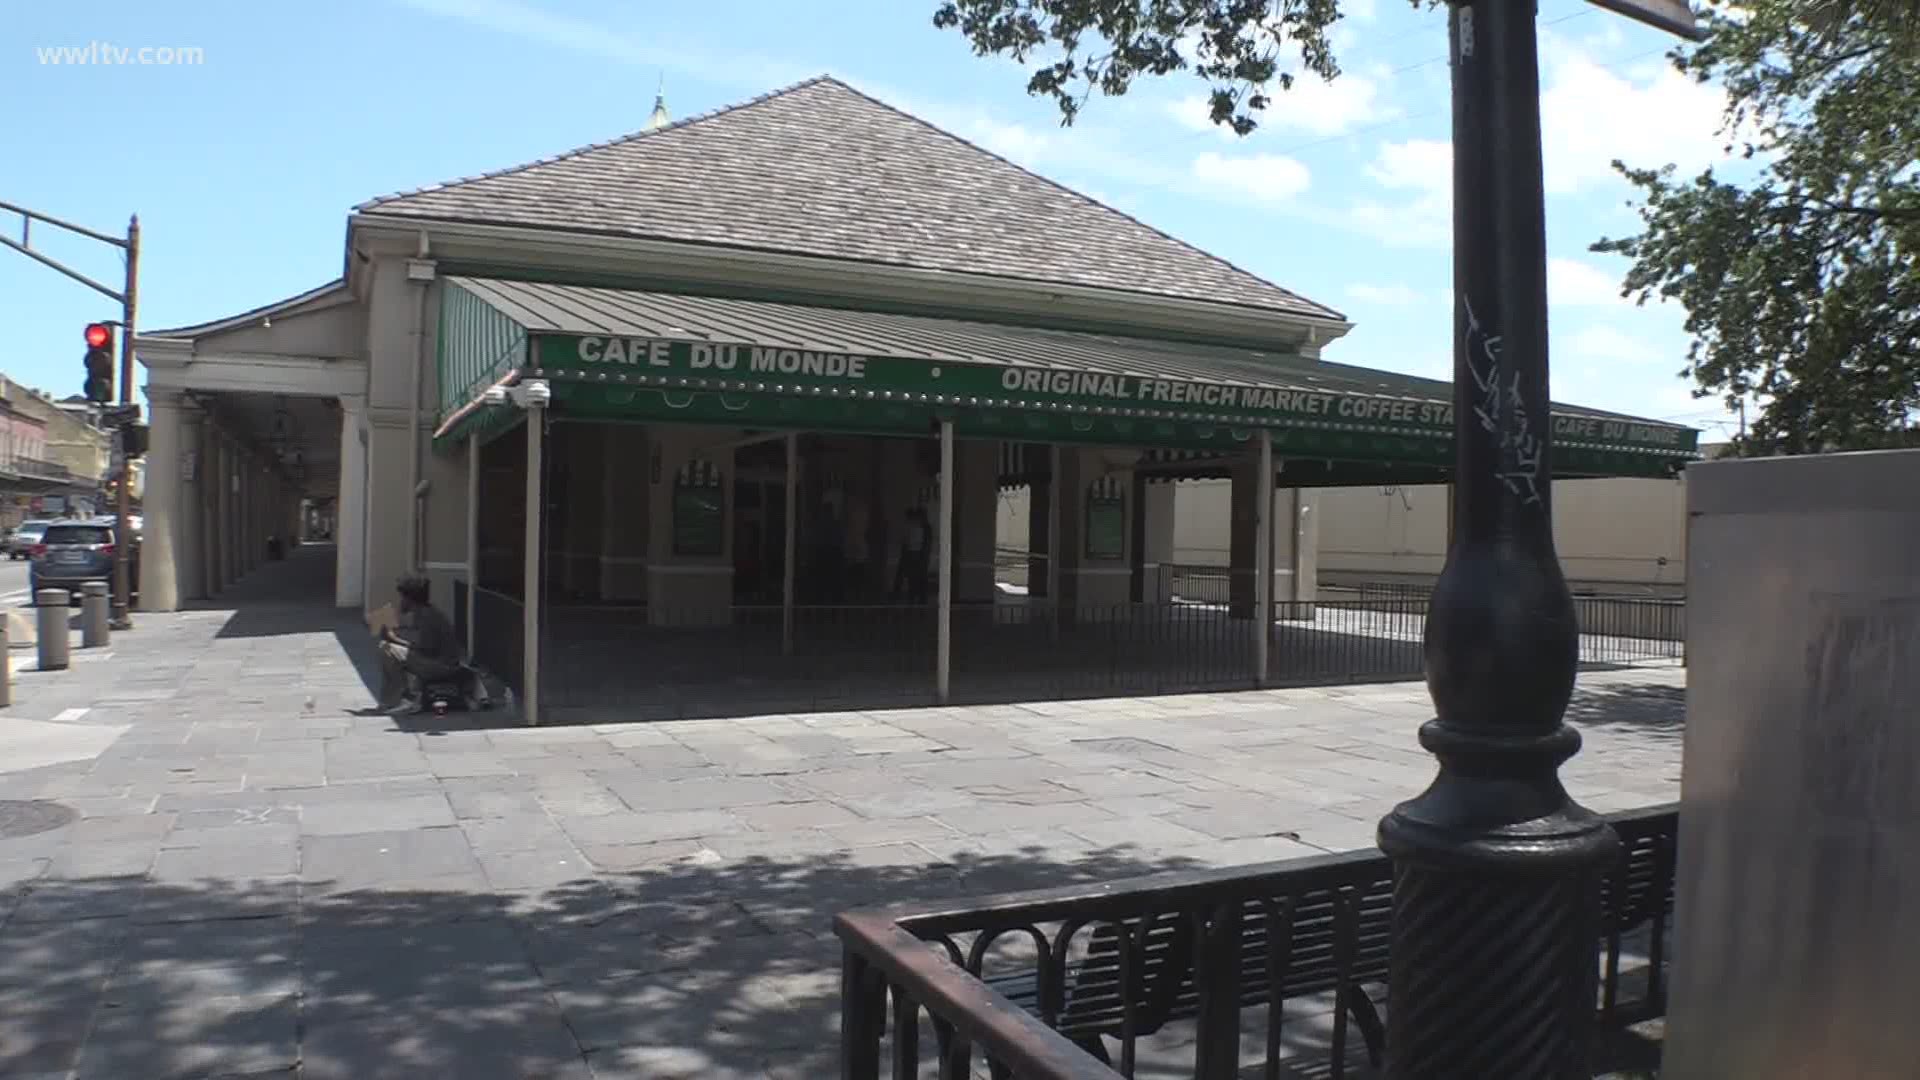 Café du Monde has a handful of other outlets, including one in City Park, that are currently open or will be soon.